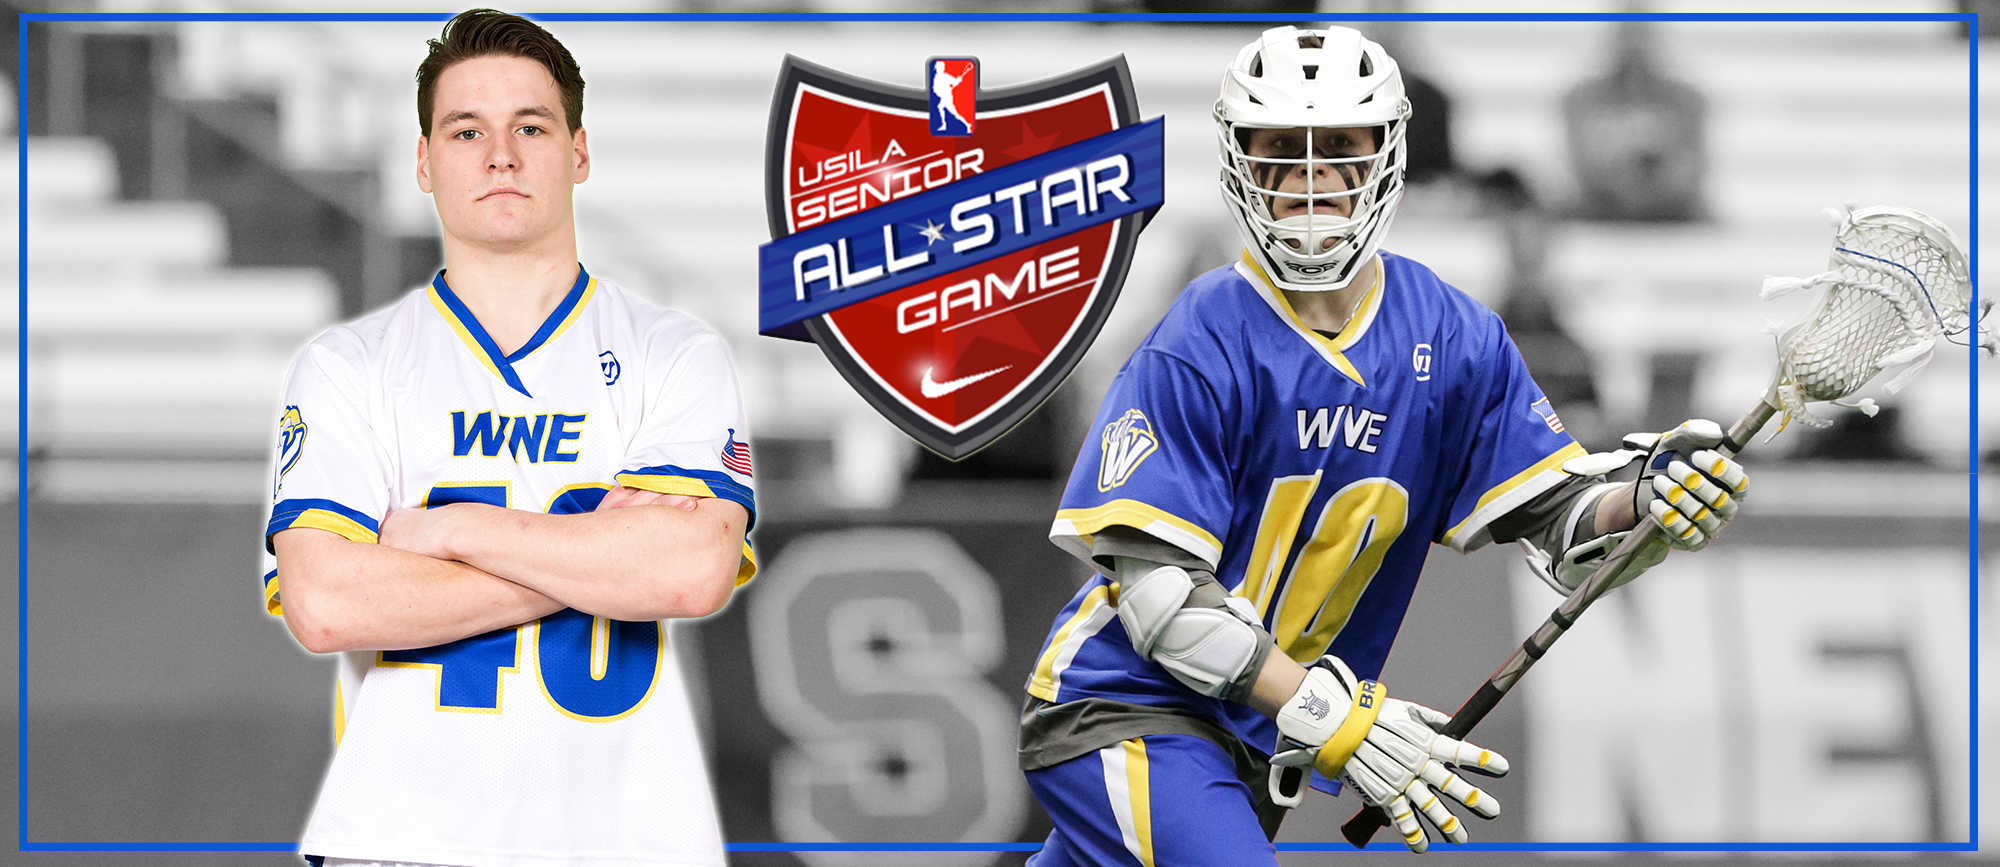 Nick Beauchamp to Represent Golden Bears in USILA/Nike North-South Senior All-Star Game